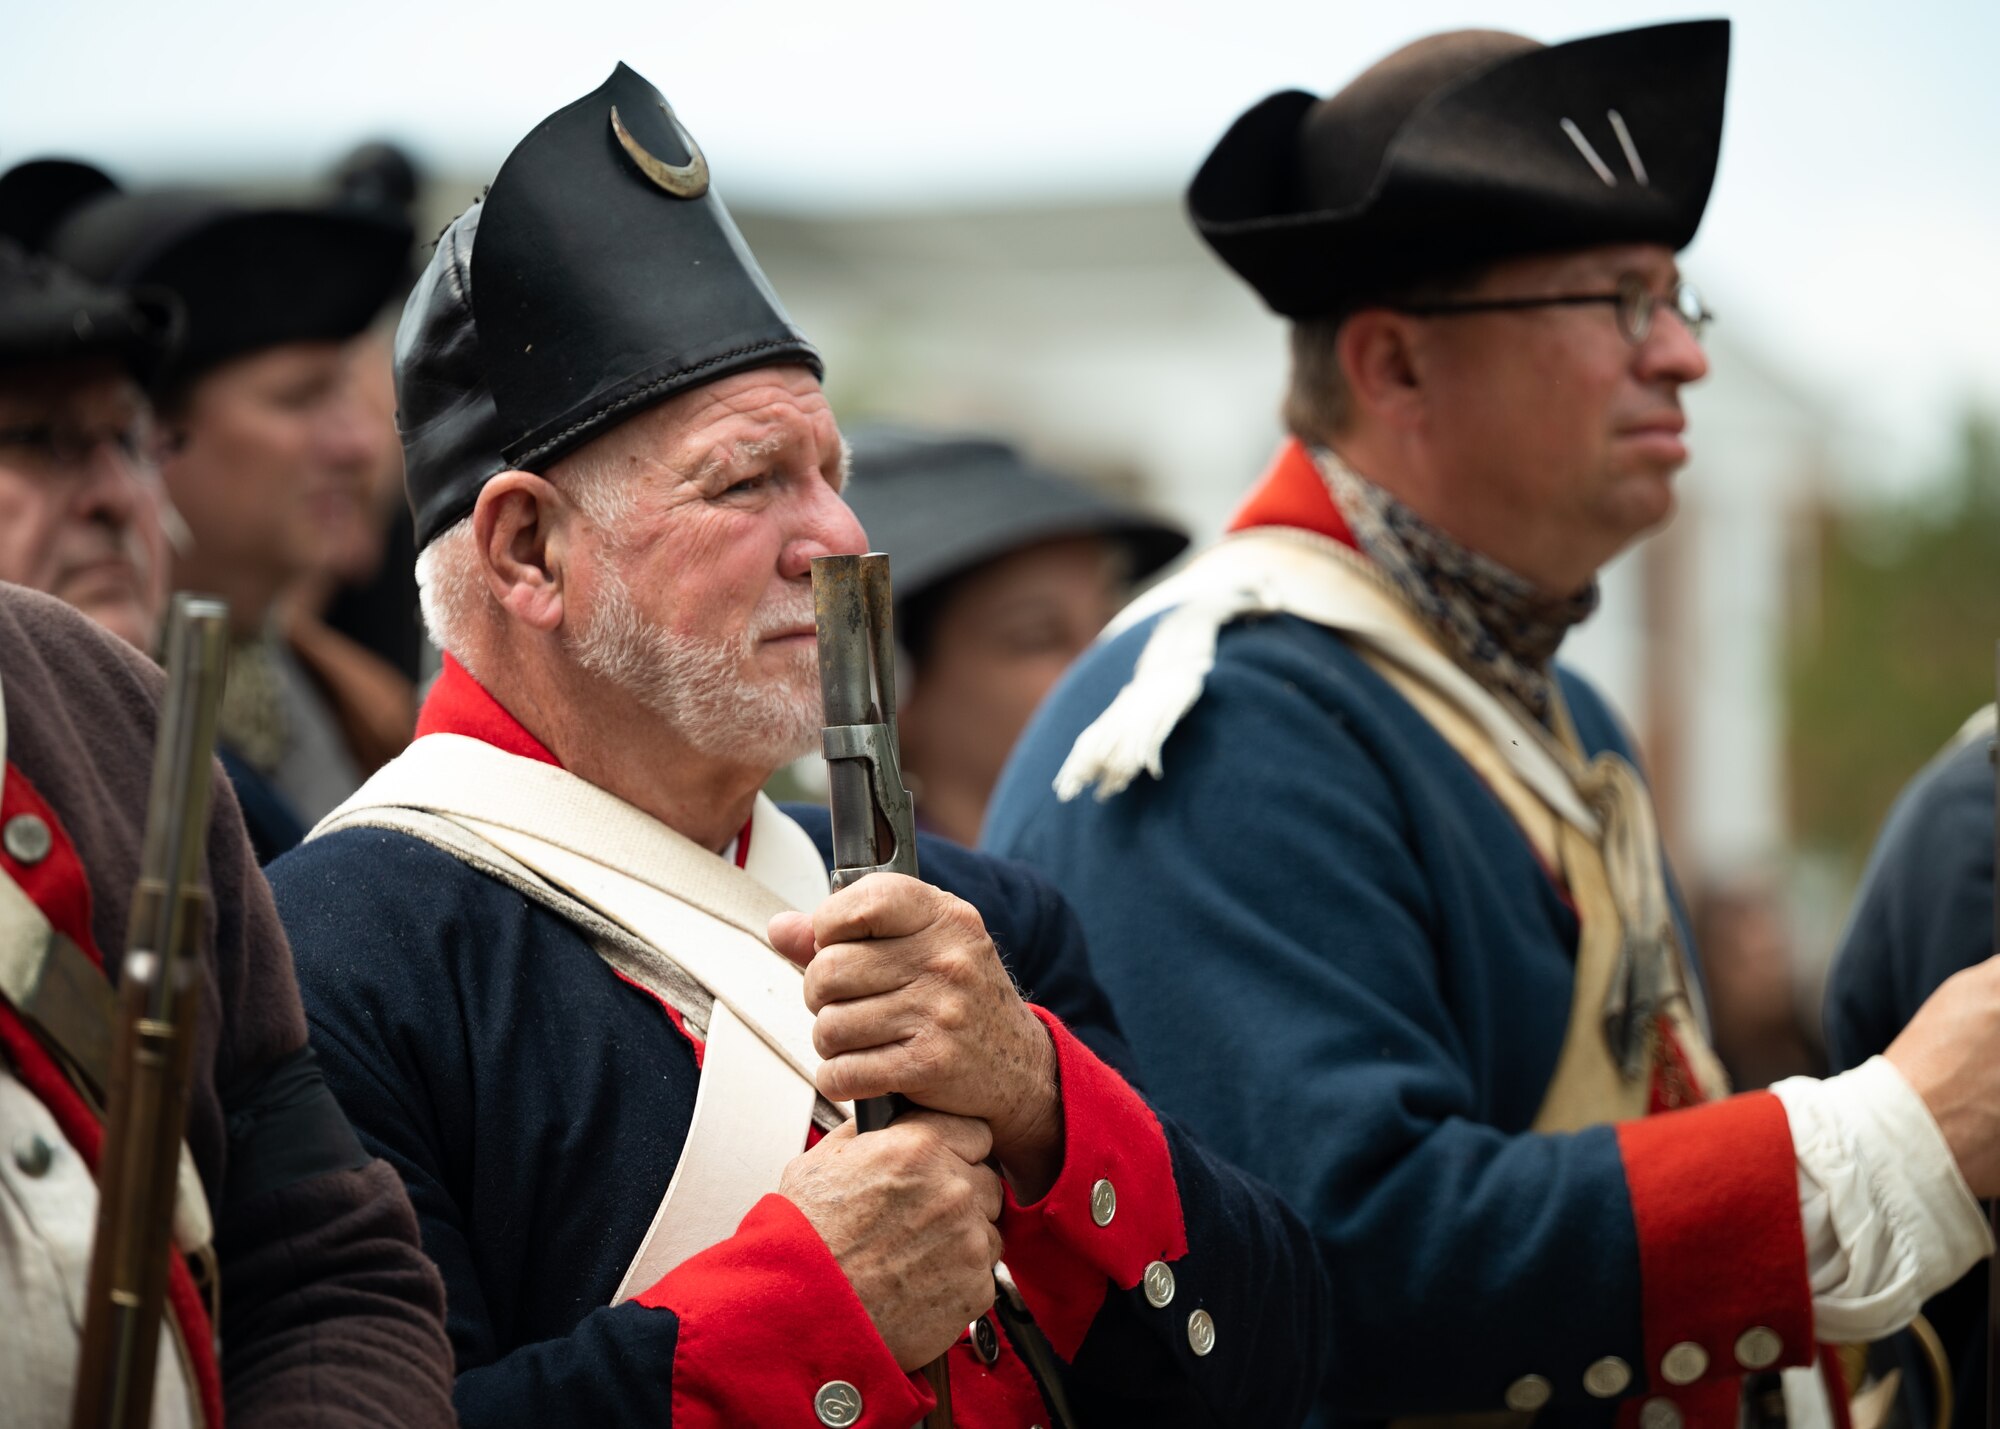 Revolutionary War reenactors pay tribute during funeral service for fallen Revolutionary War soldiers.